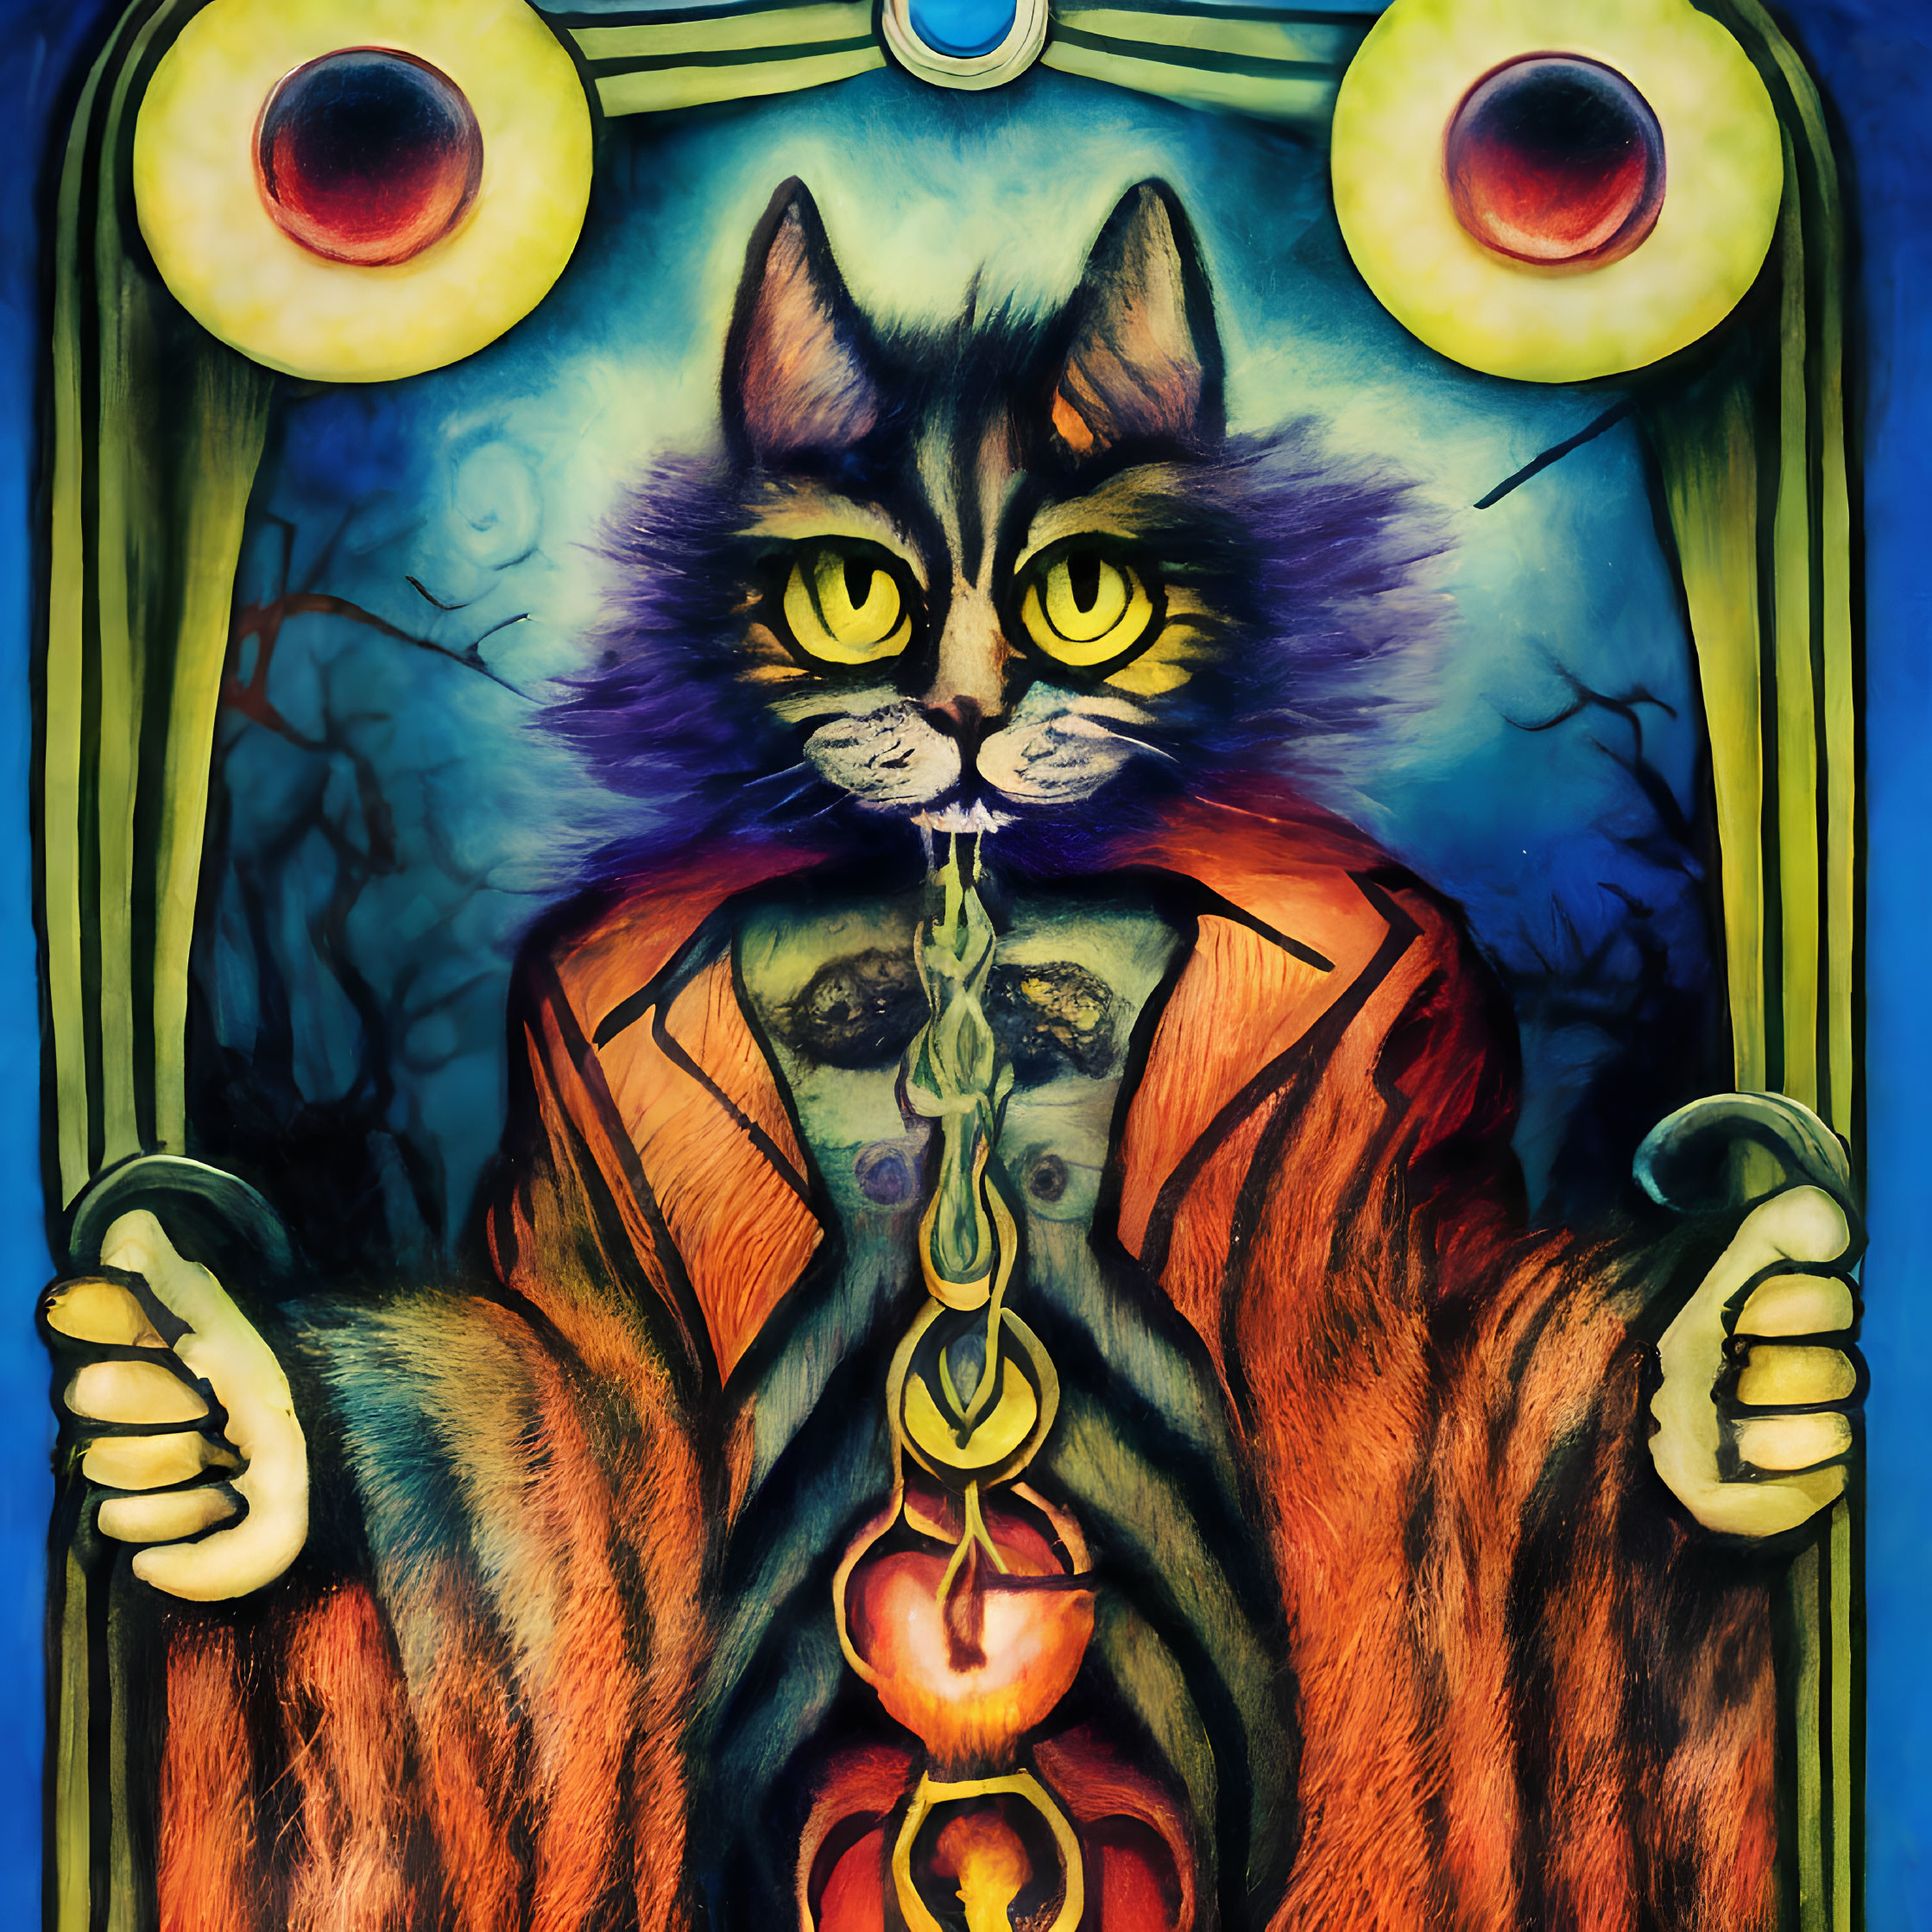 Vibrant humanoid cat figure with key in hand and stylized eyes in mysterious backdrop